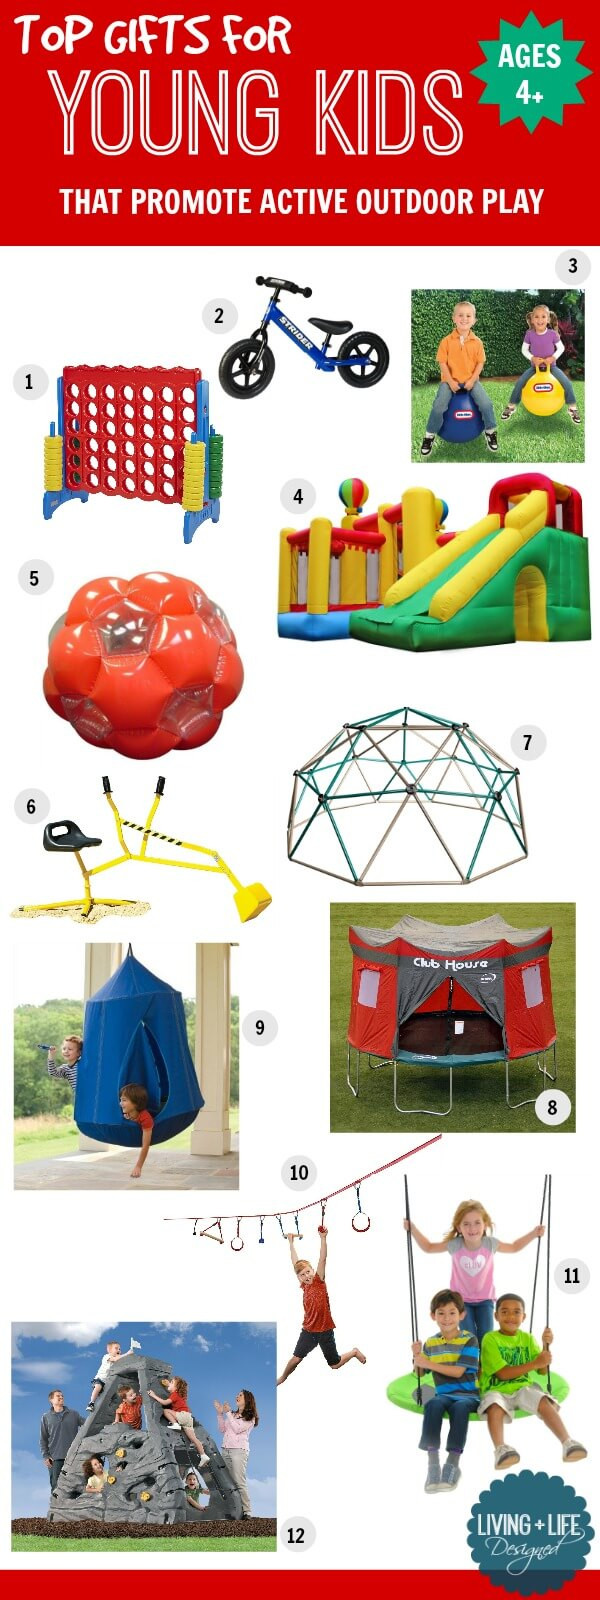 Outdoor Gifts For Kids
 Gift Ideas for Young Kids Ages 4 That Promote Active